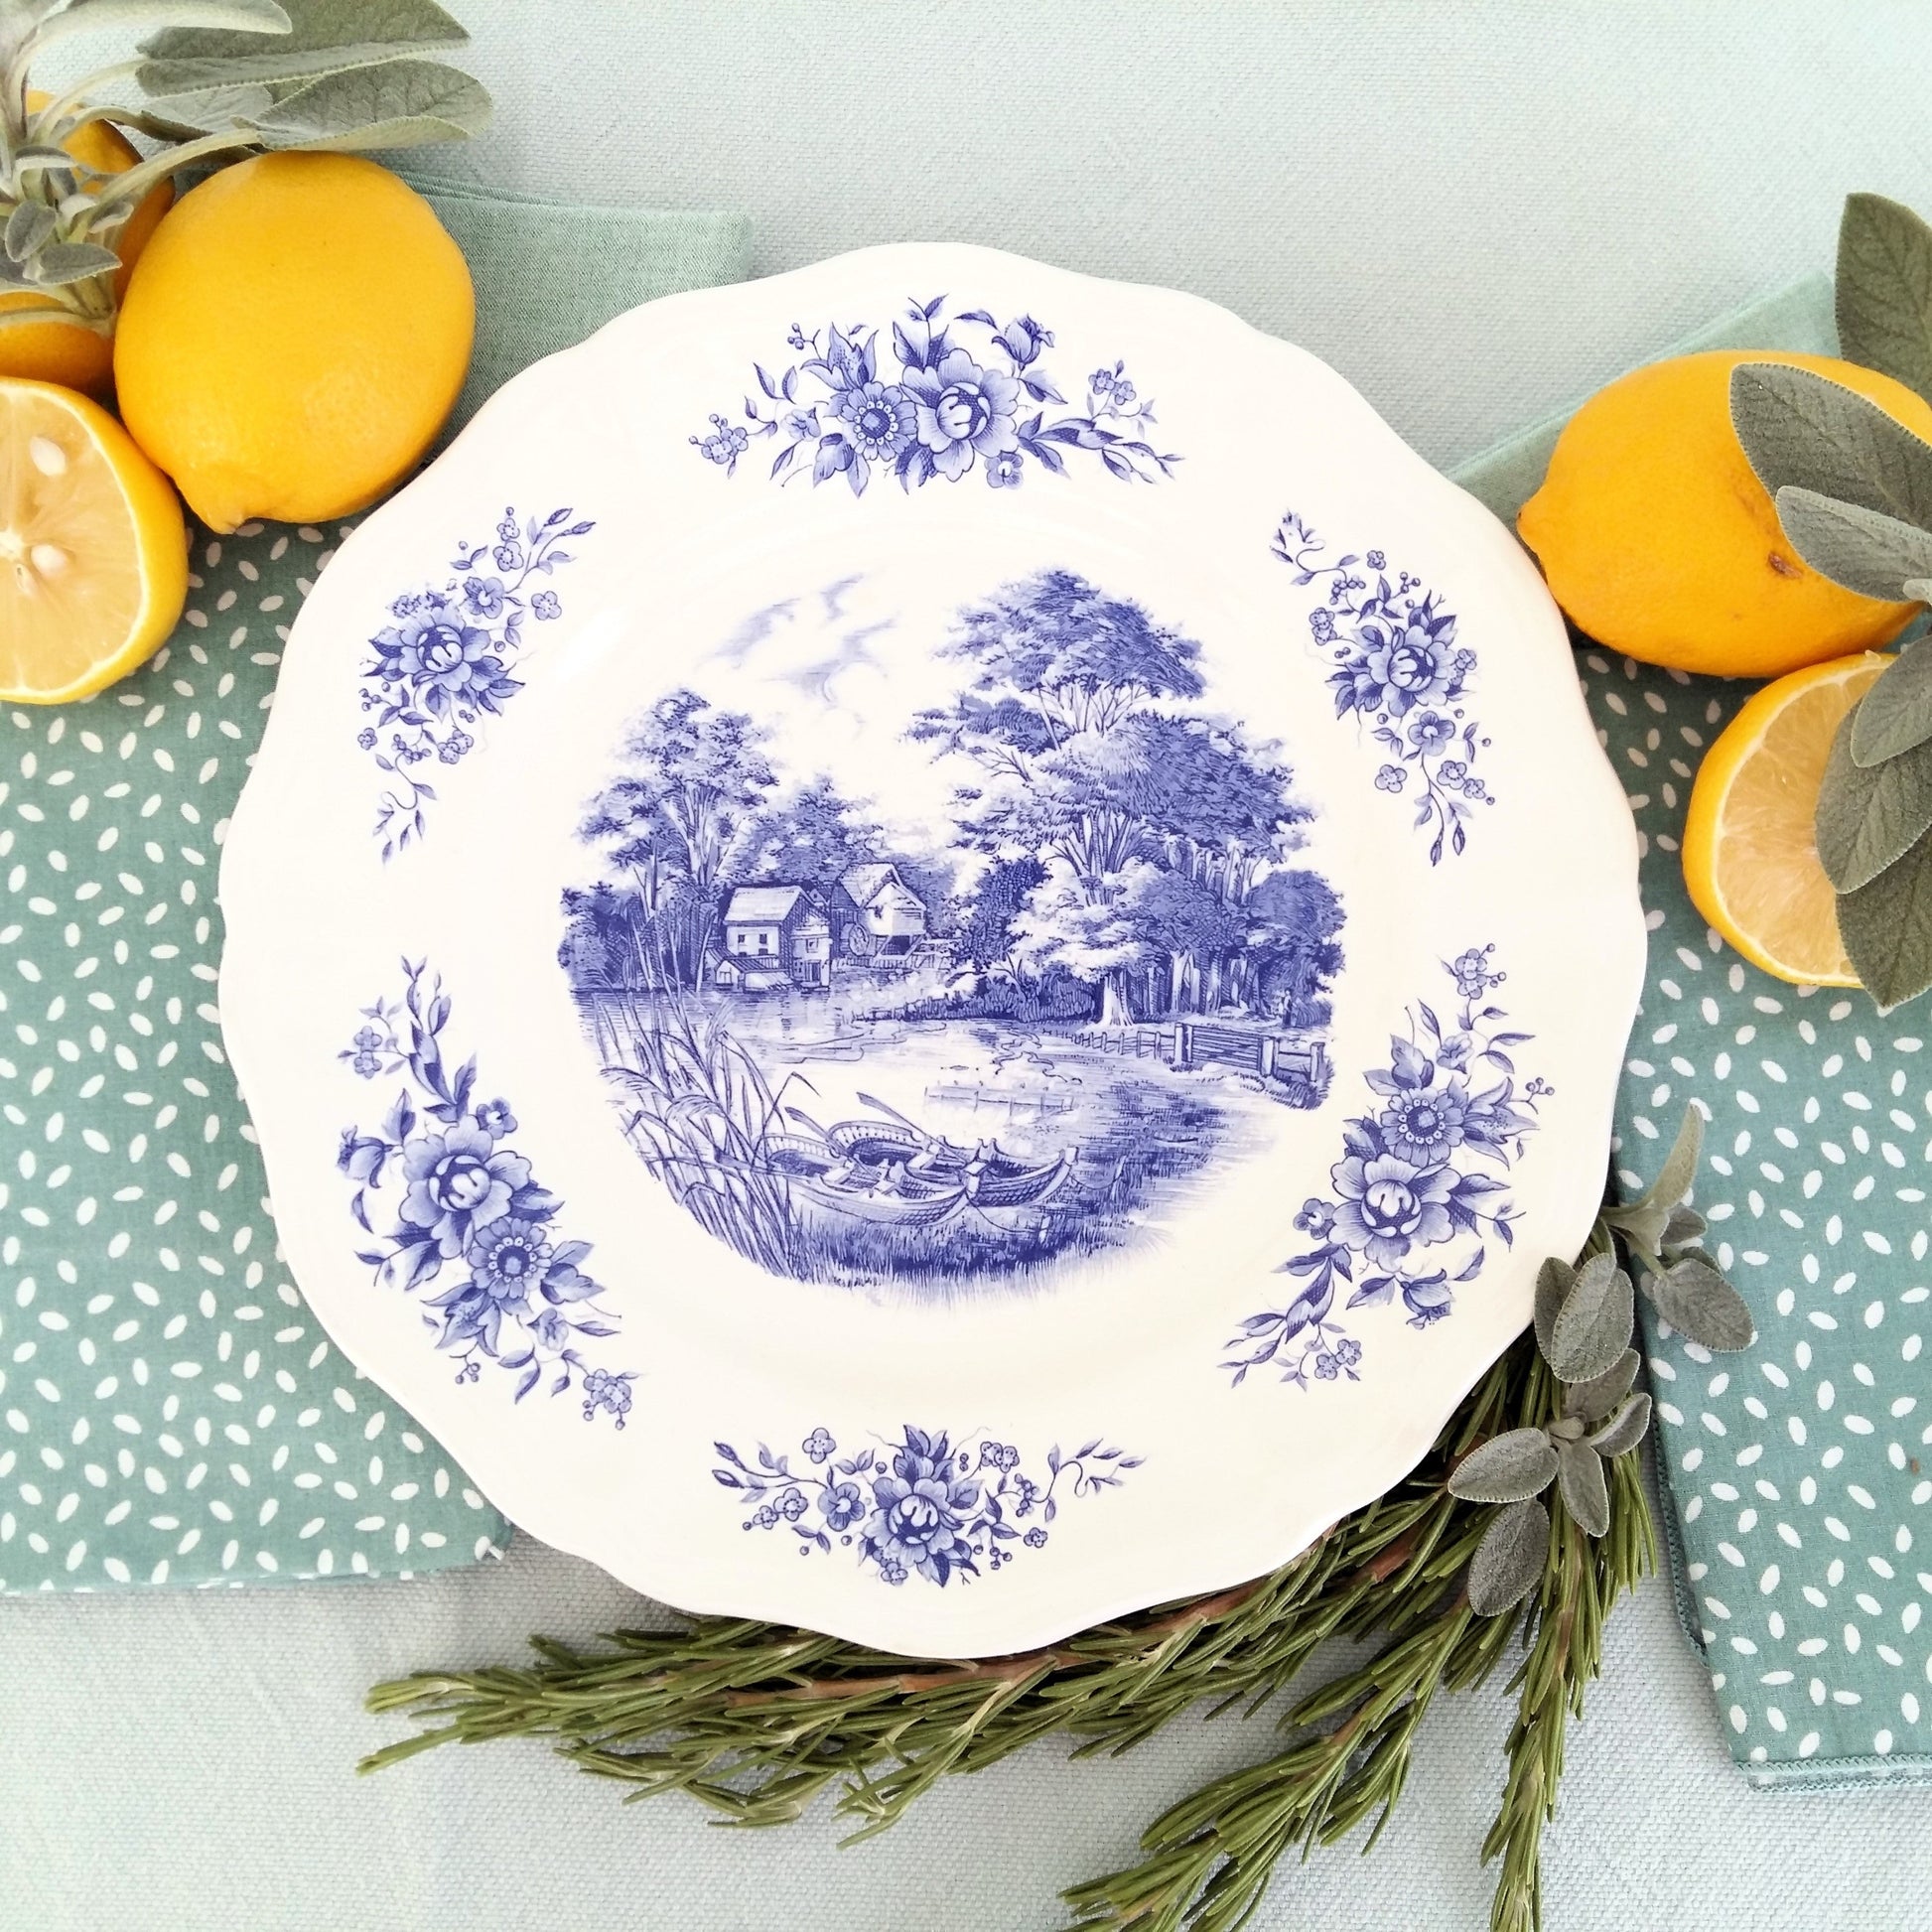 8 mix and match transferware plates and bowls From Tiggy & Pip. €199 With FREE worldwide shipping.